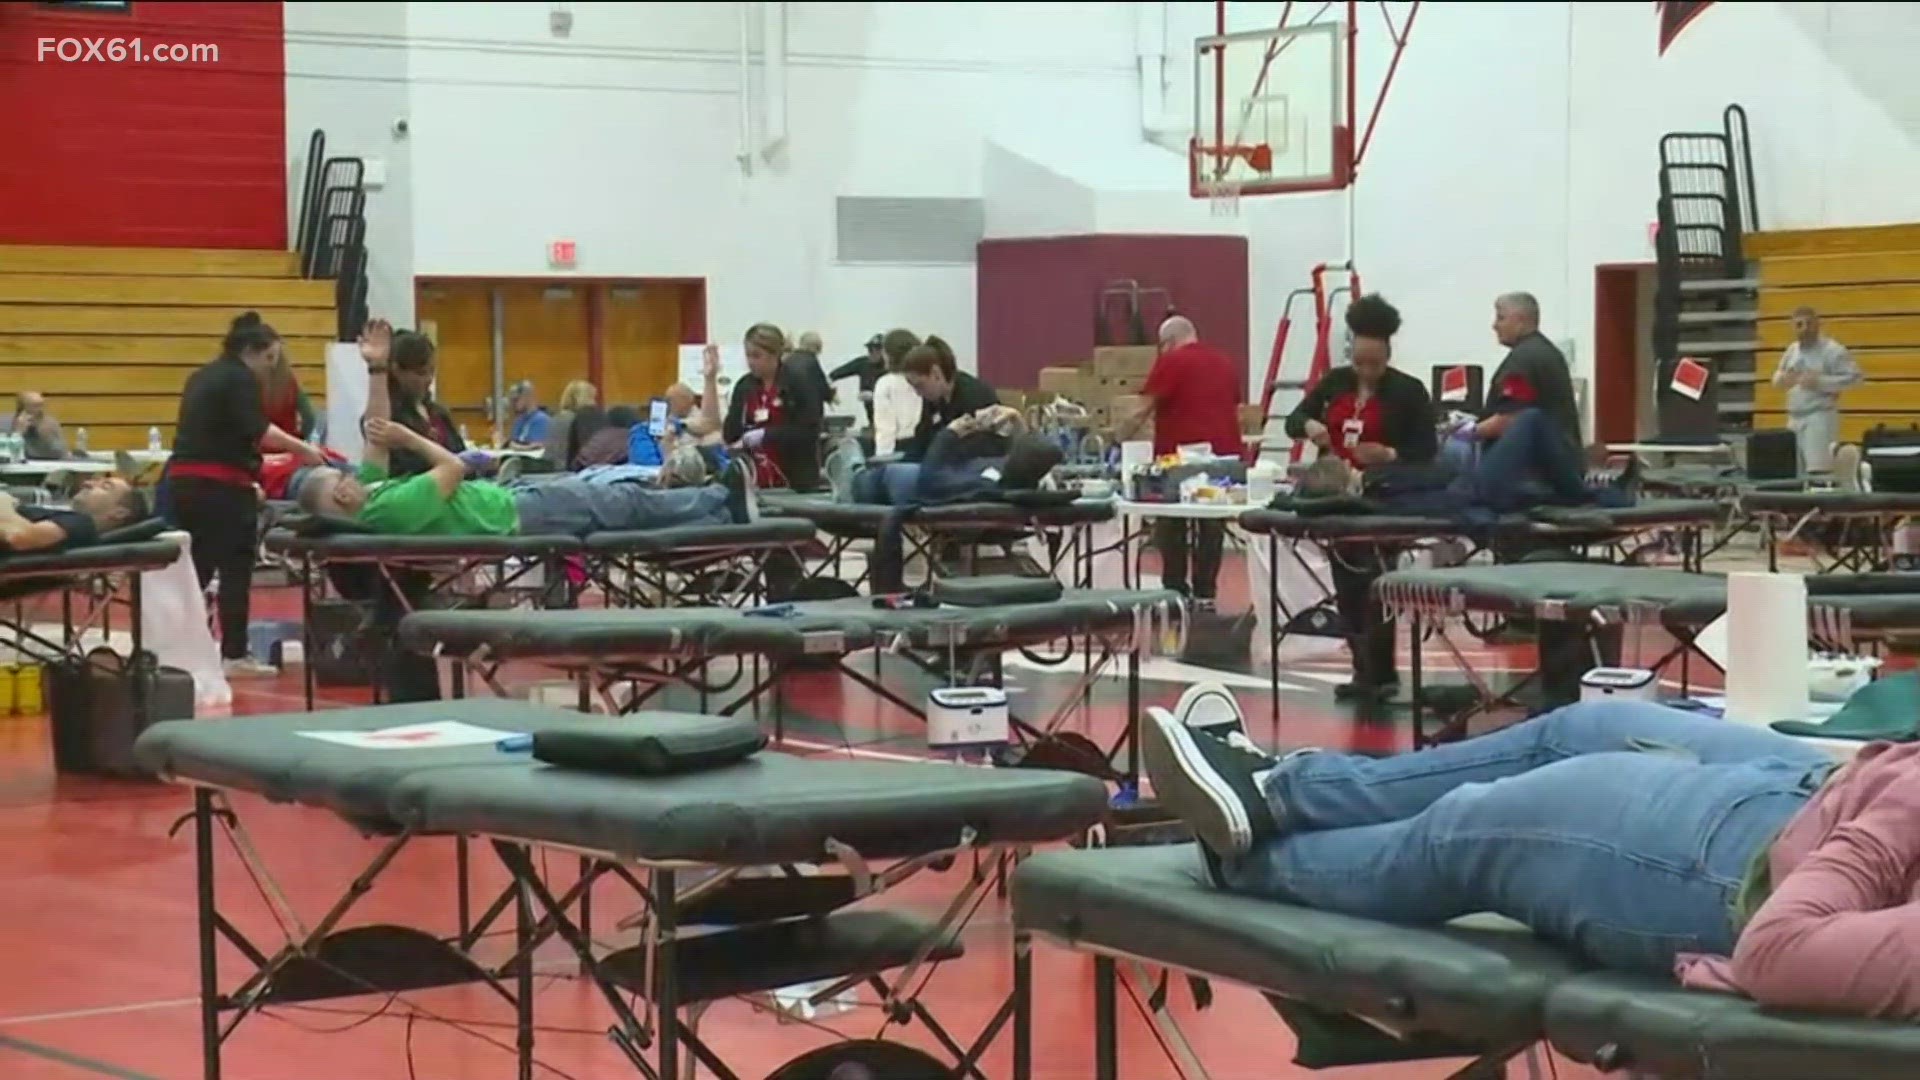 The 37th Annual Ray Crothers Blood Drive will be held from 8:30 a.m. to 3:30 p.m. at Manchester High School.